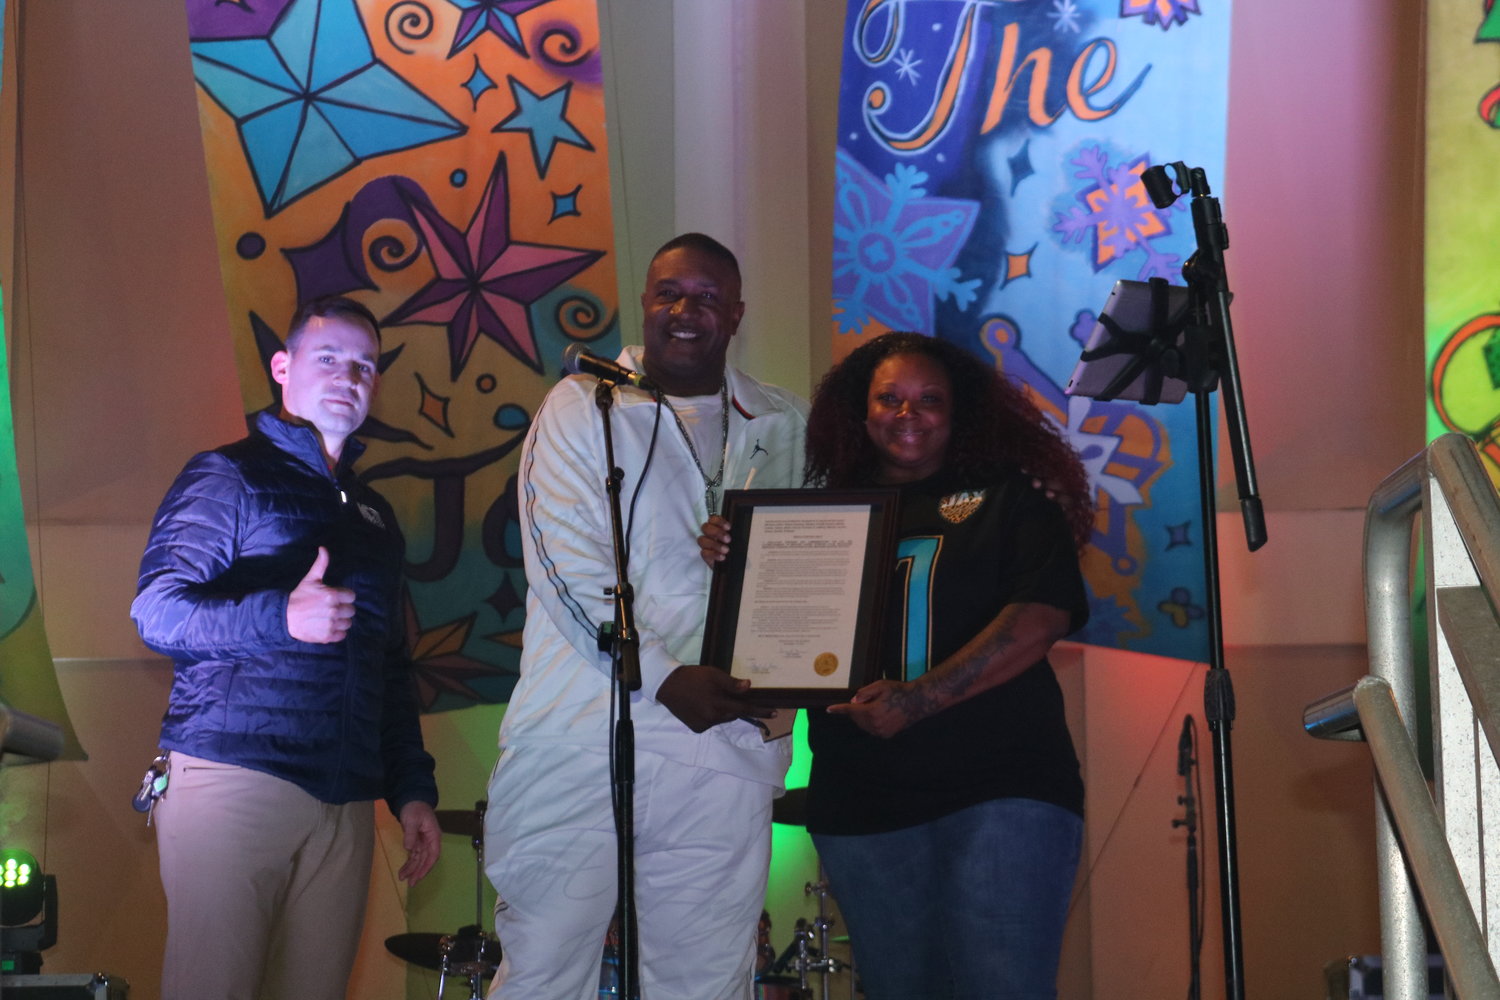 Jacksonville City Councilman Rory Diamond presented Sterling’s children, Tonya and Rod Joyce, with a proclamation recognizing him as the “unofficial mayor of Jacksonville Beach.”